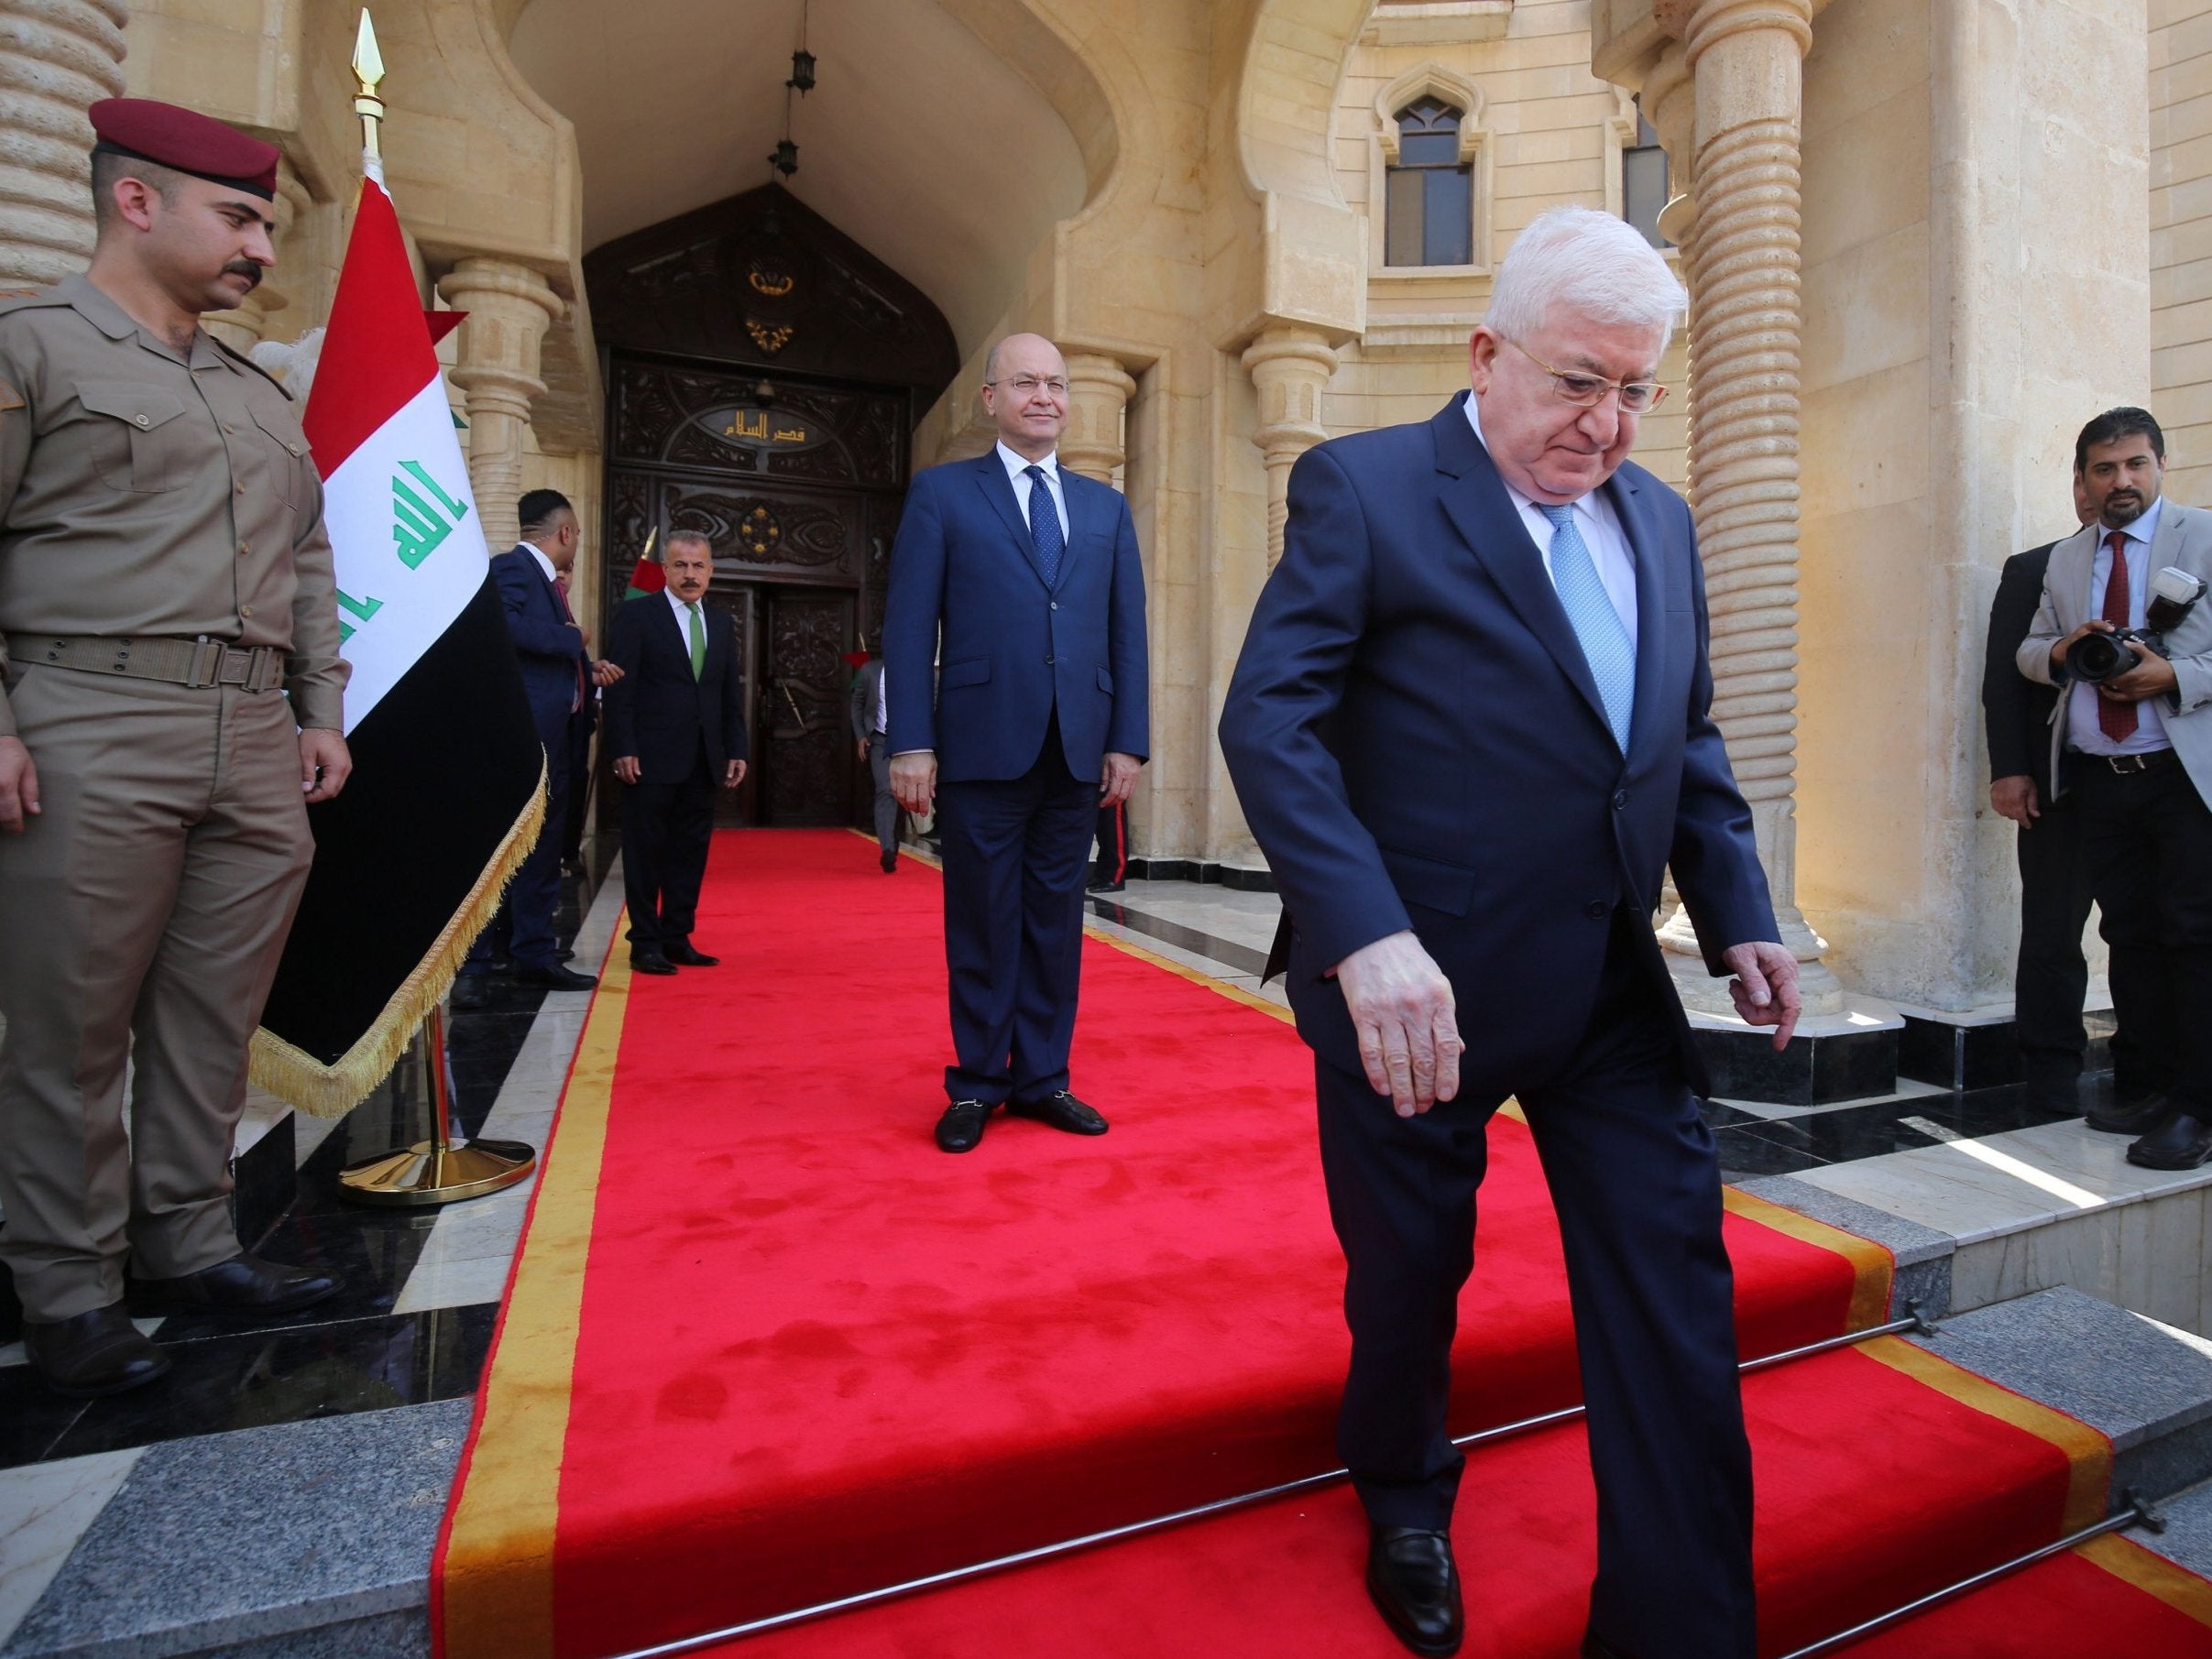 Iraq’s newly elected president, Kurdish politician Barham Salih (centre), watches on as his predecessor Fuad Masum leaves during the handing-over ceremony in Baghdad on Wednesday